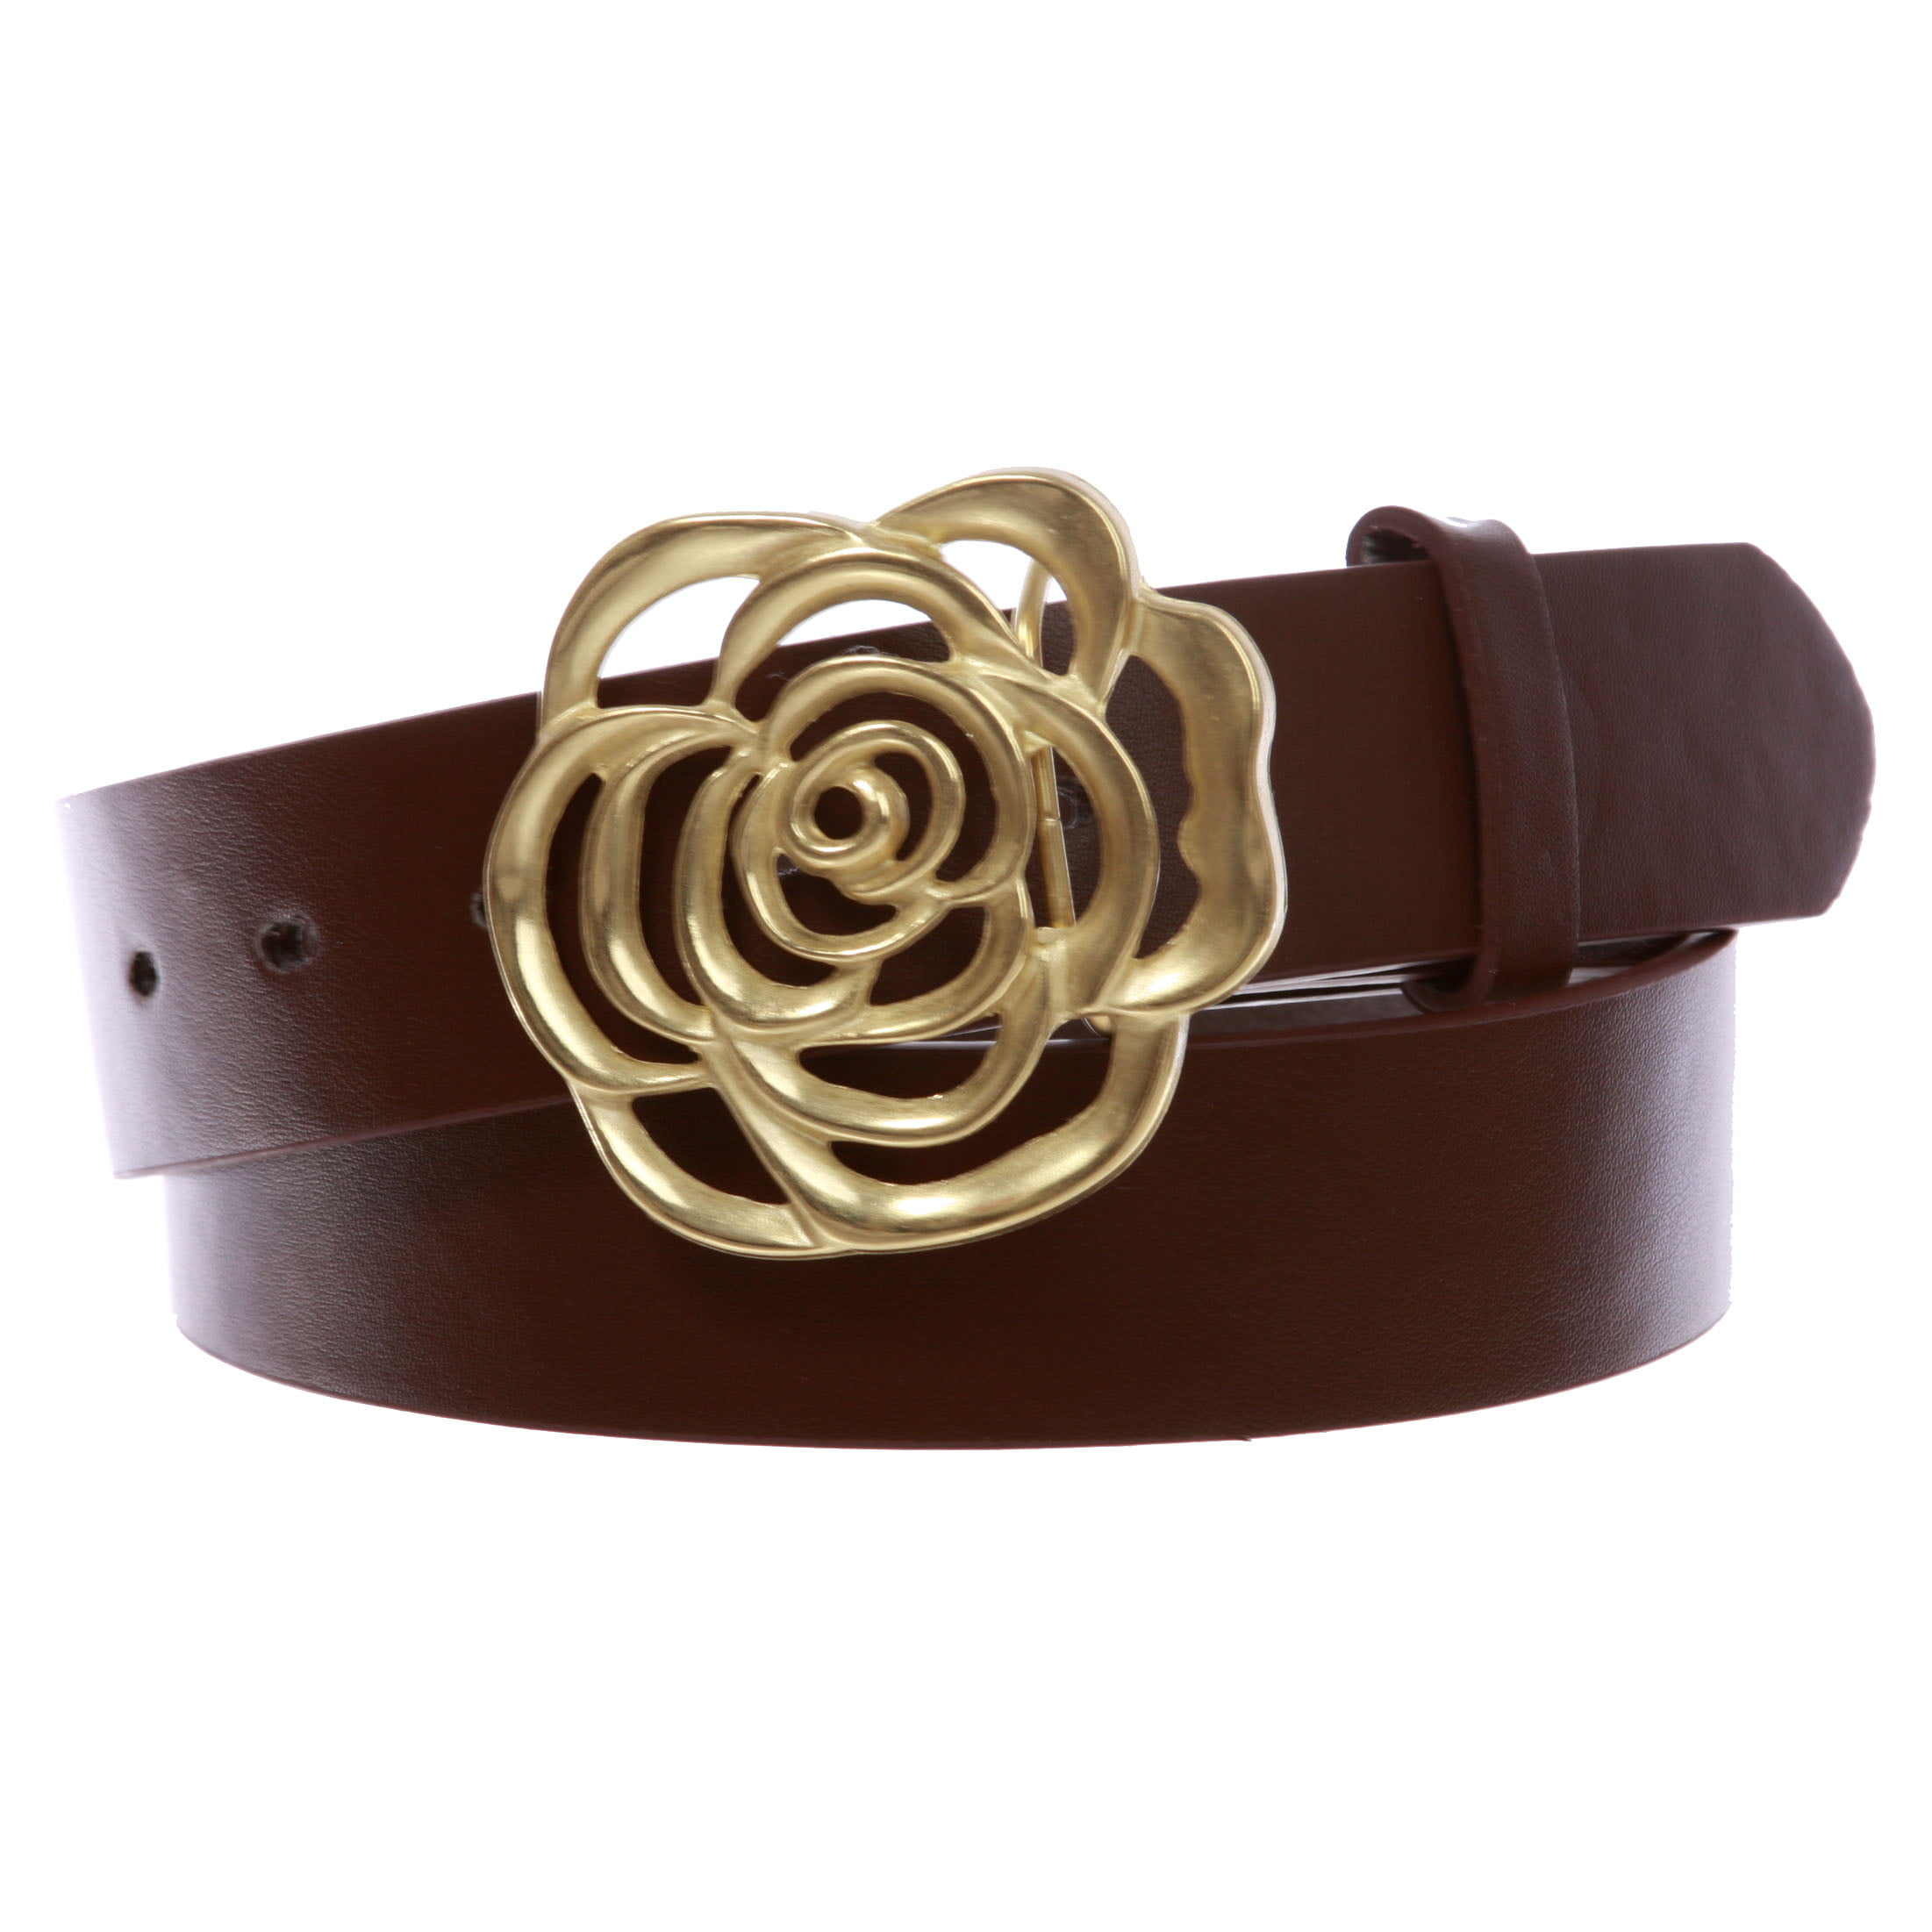 WOMEN'S SUEDE LEATHER BELT WITH FLORAL ROSE BUCKLE 1-1/2" WIDE MULTIPLE COLORS